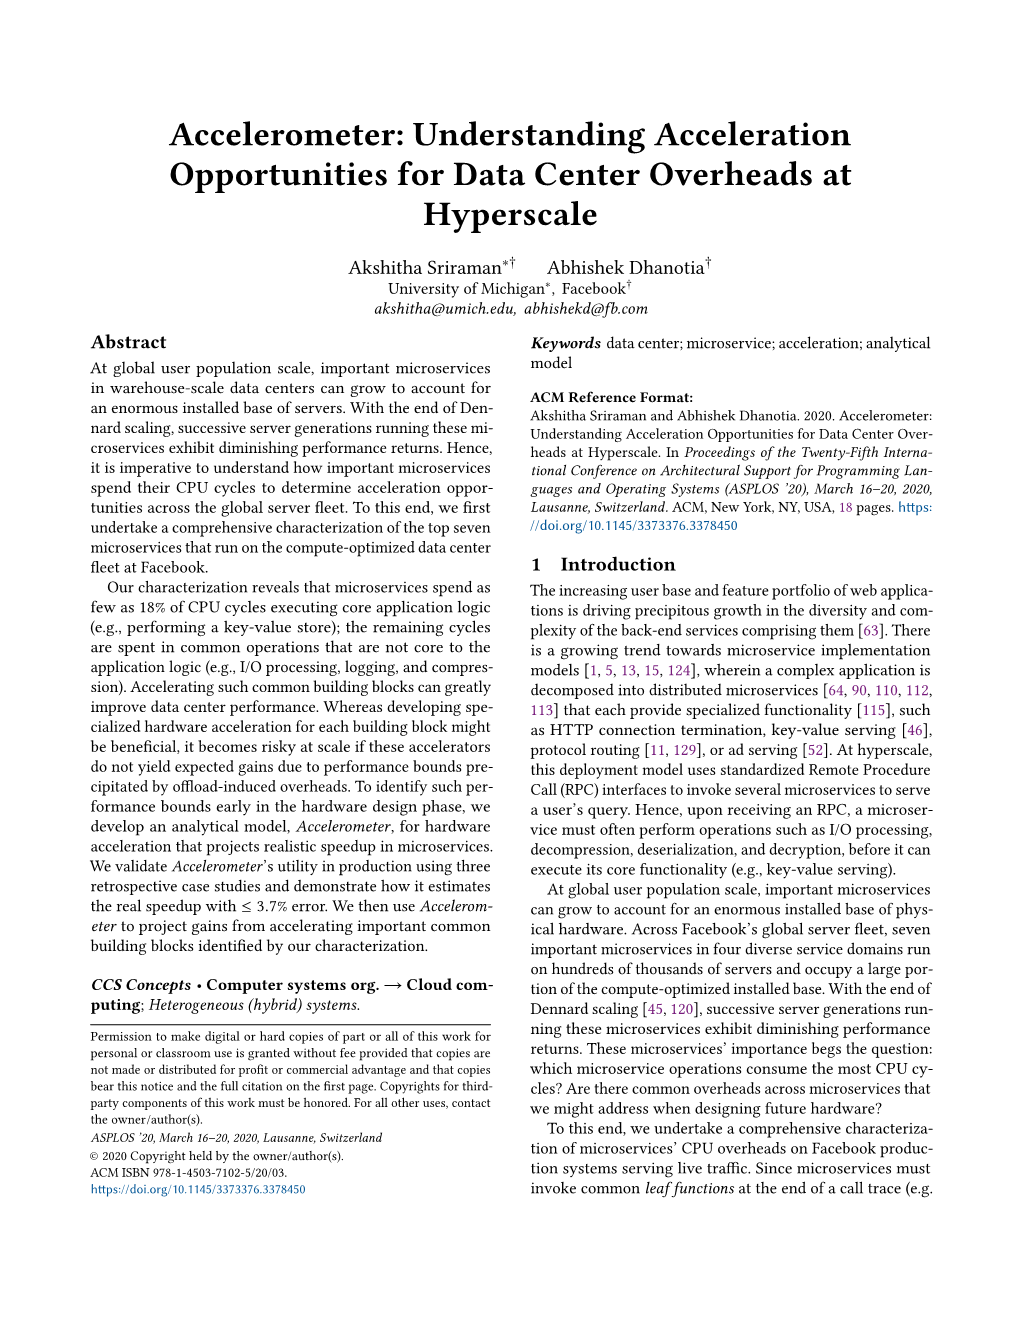 Accelerometer: Understanding Acceleration Opportunities for Data Center Overheads at Hyperscale